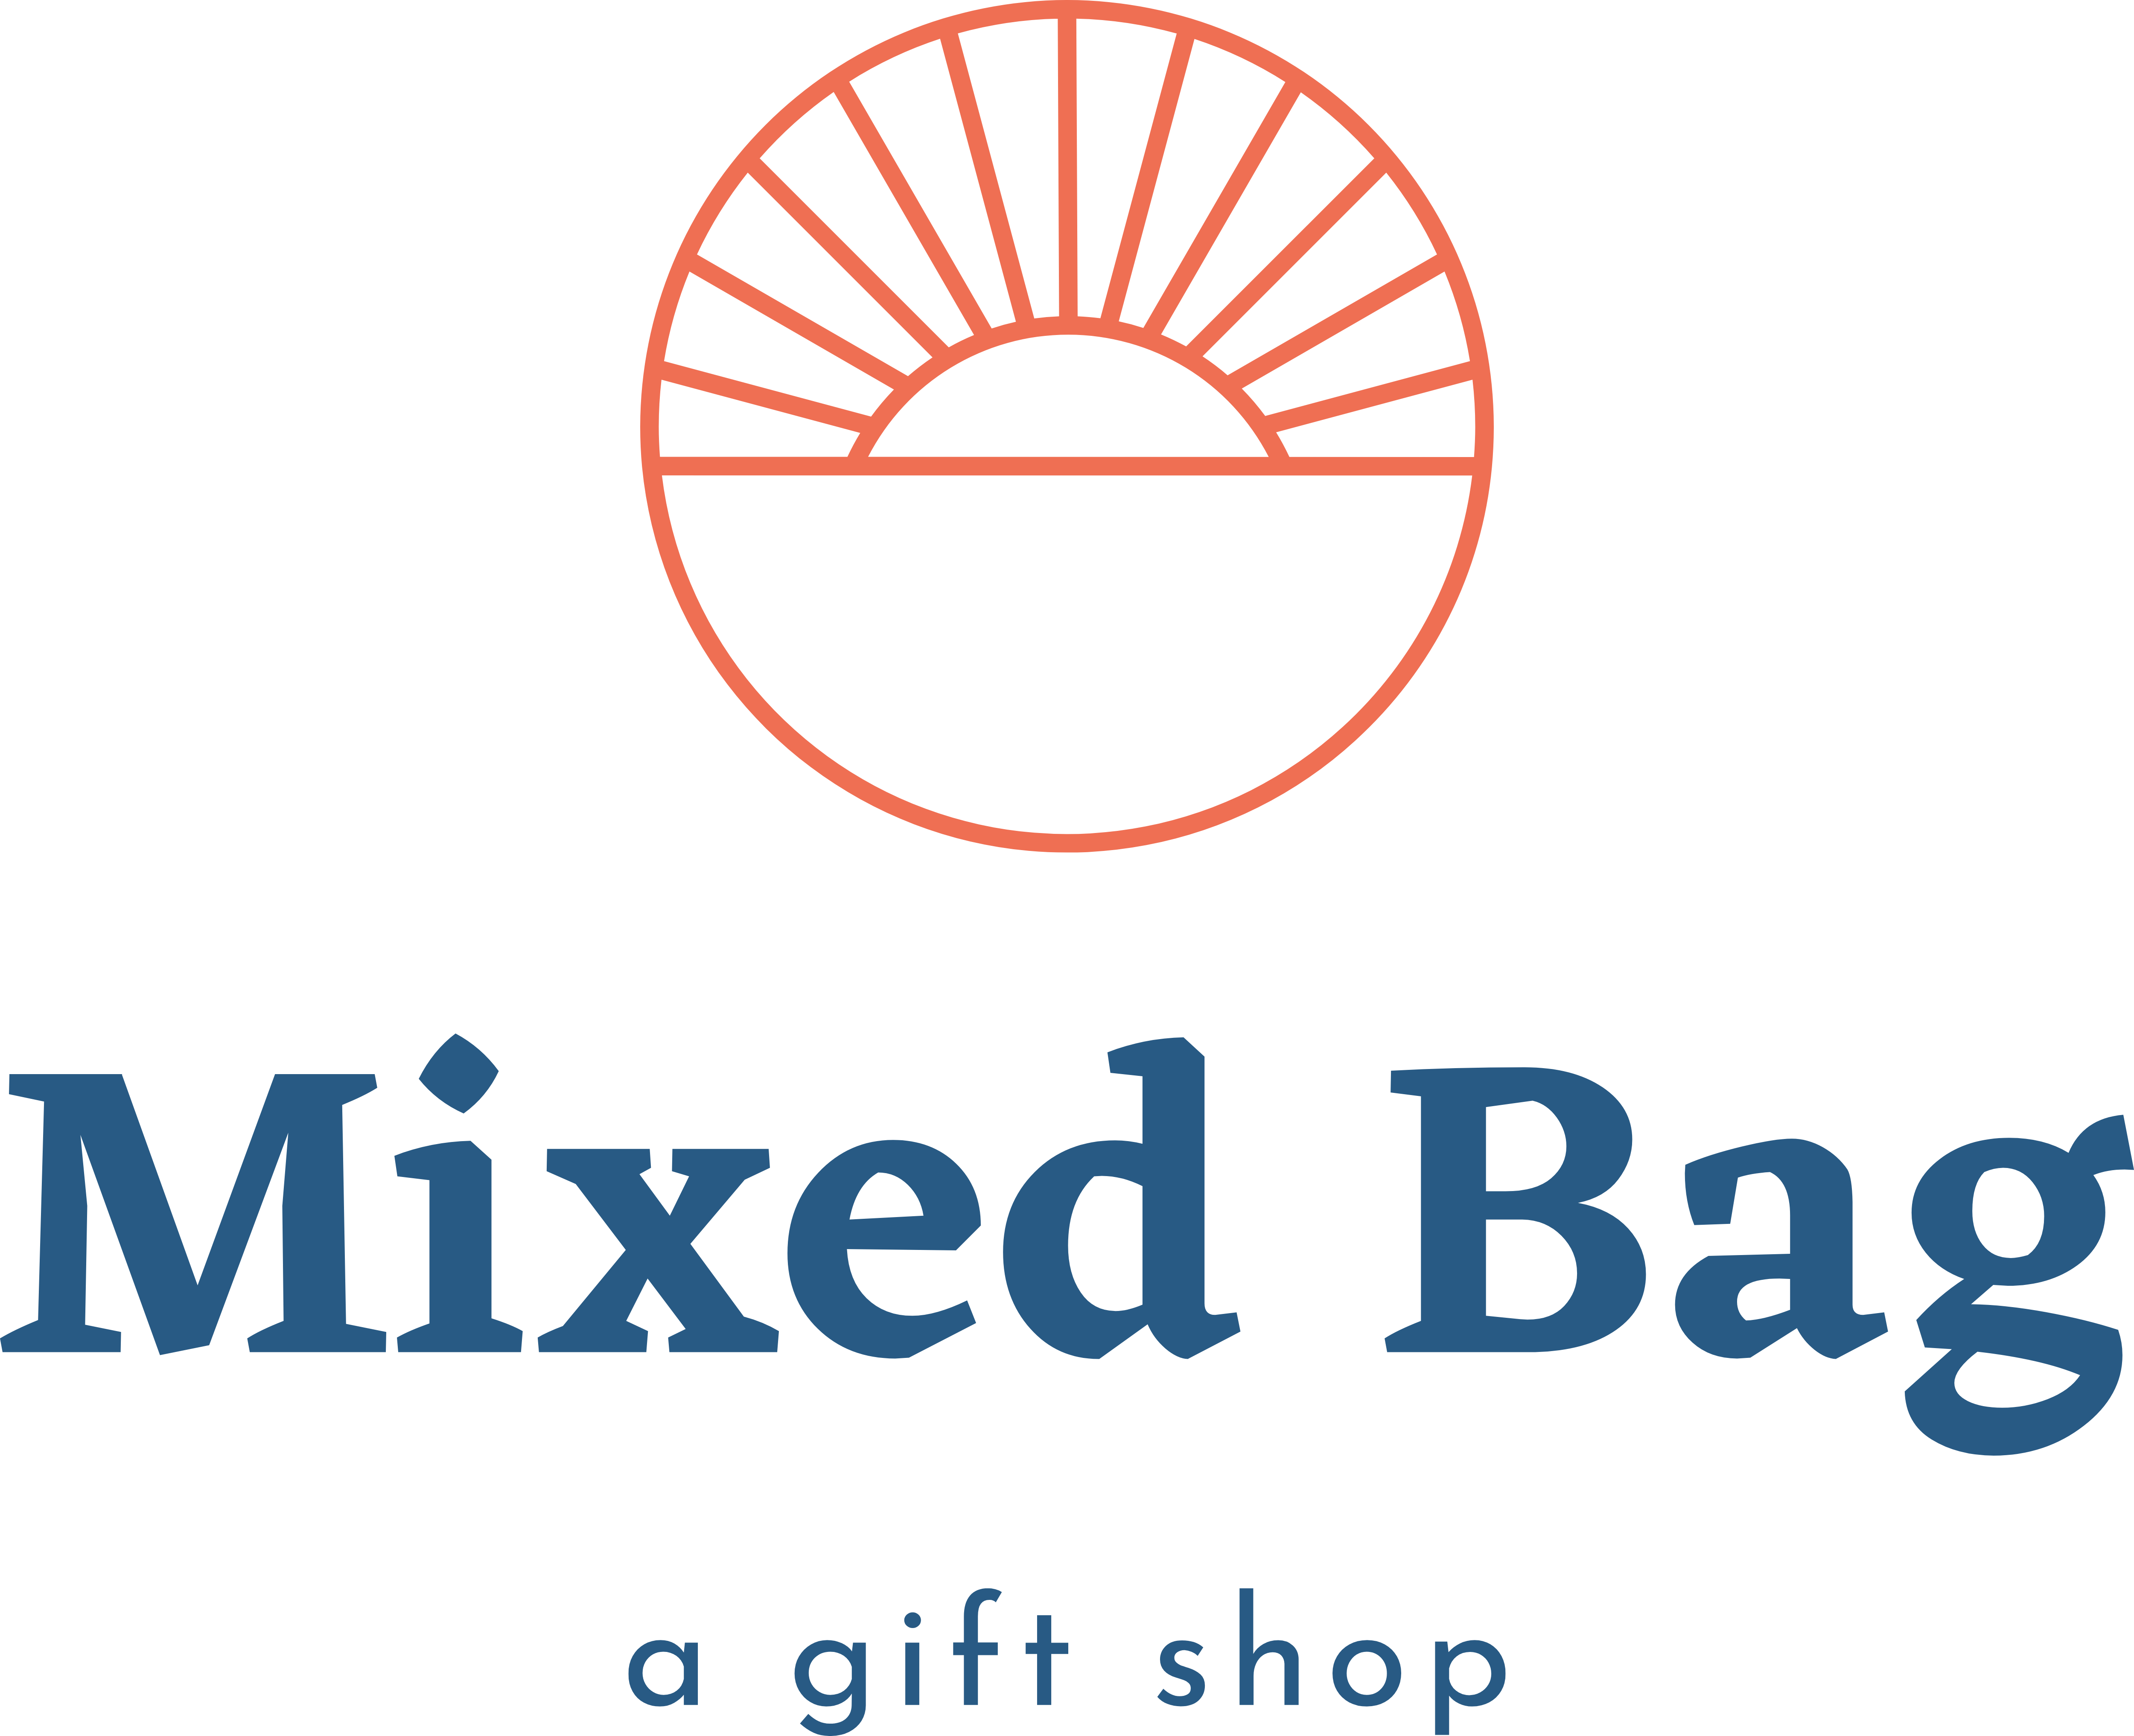 Buy Mixed Bag: Jokes, Riddles, Puzzles & Memorabilia Book Online at Low  Prices in India | Mixed Bag: Jokes, Riddles, Puzzles & Memorabilia Reviews  & Ratings - Amazon.in